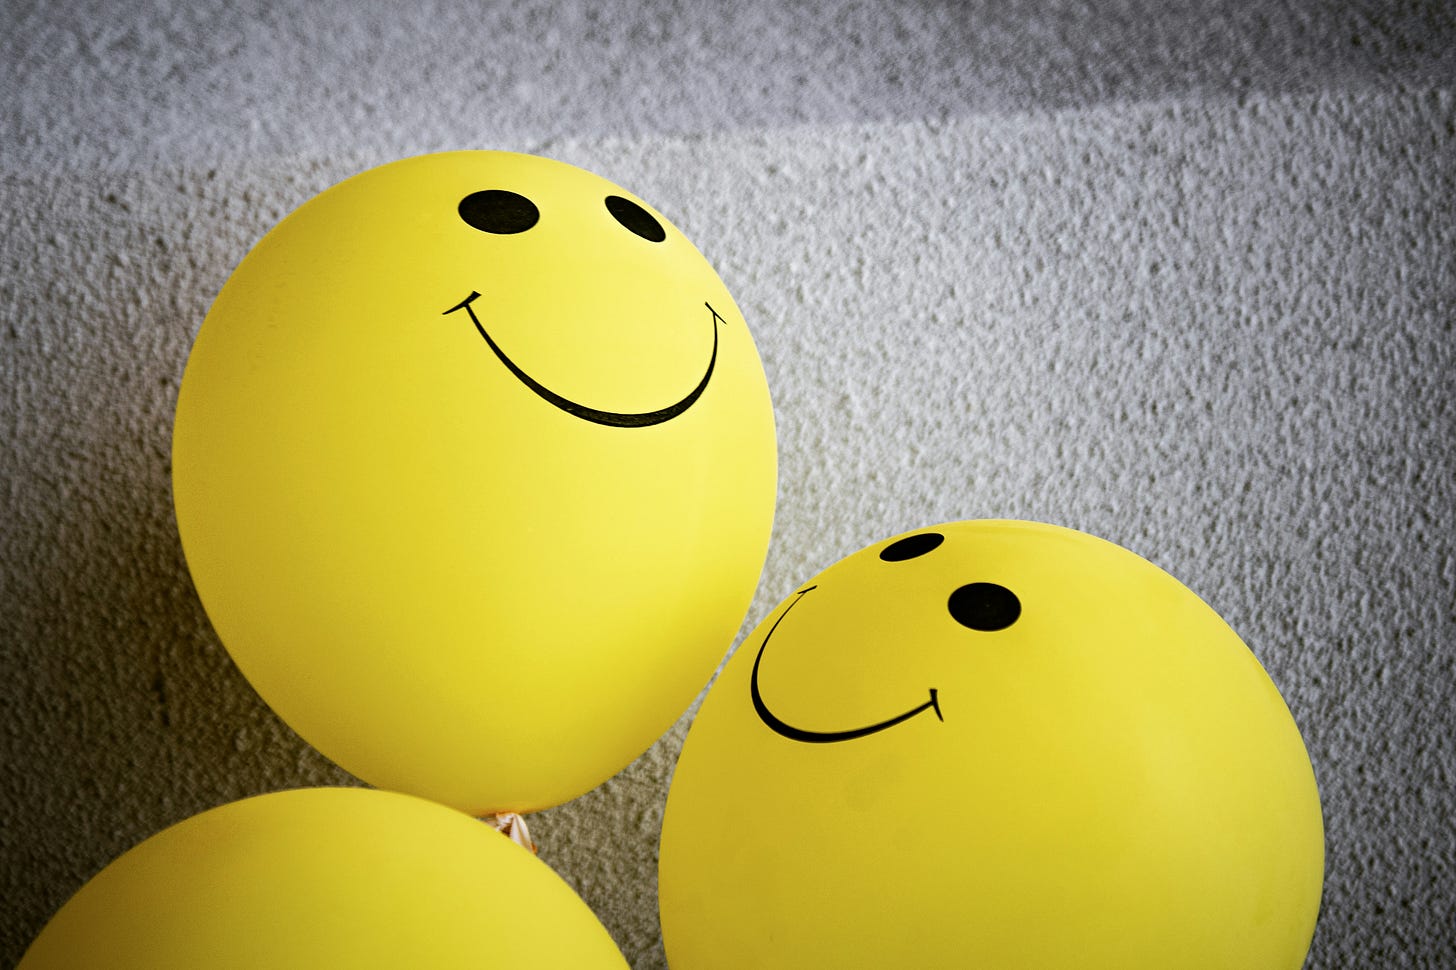 Two yellow balloons with smiley faces in black ink lying on a gray floor.